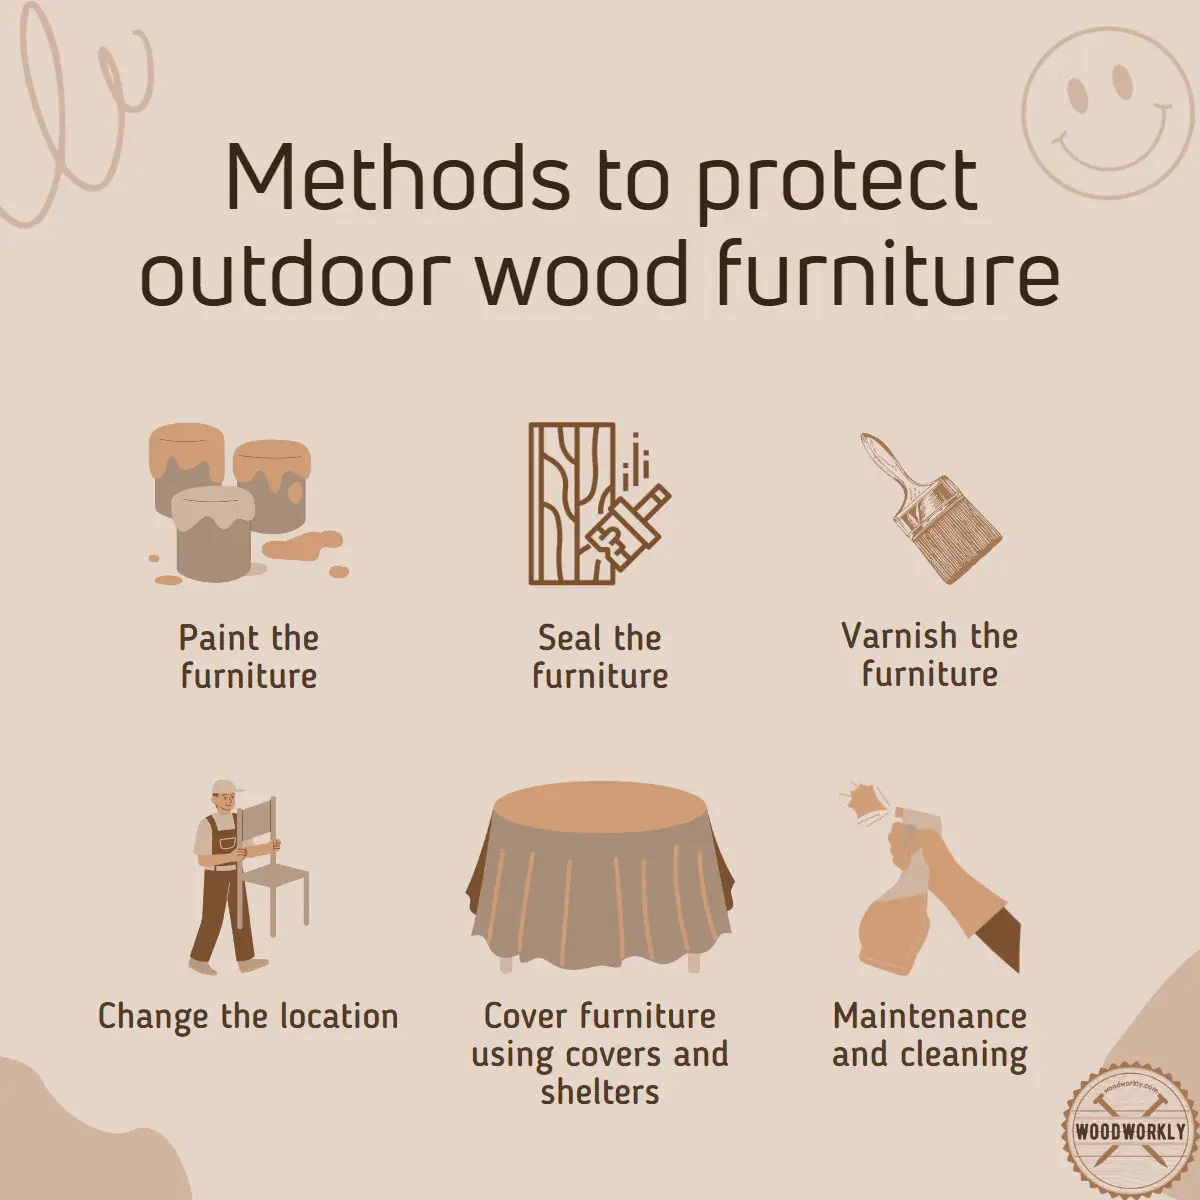 methods to Protect outdoor wood furniture